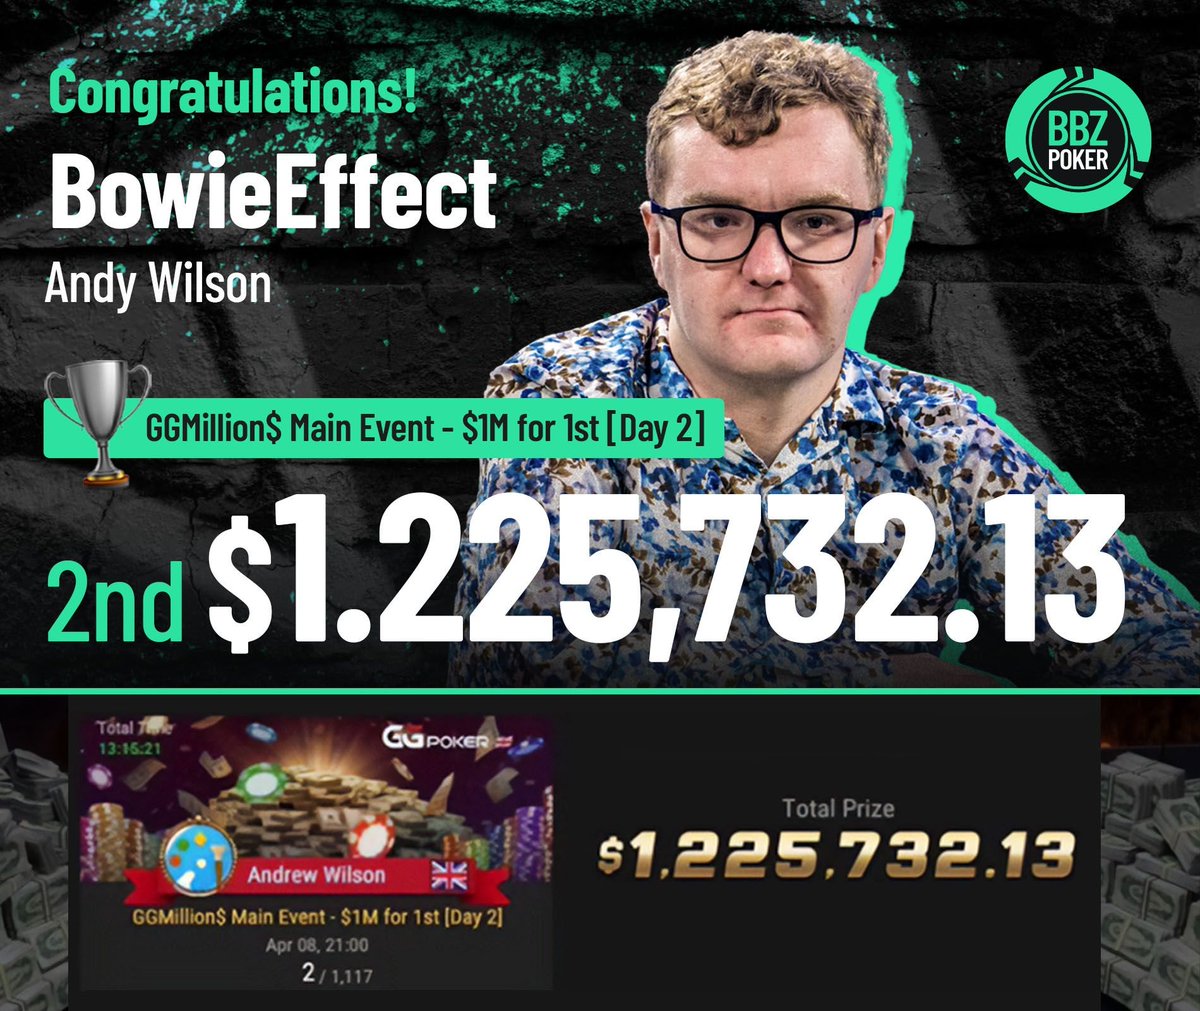 'If you're not first you're last' - @BowieEffect Not in this case.....Congratz to our good friend & BBZ Coach Andy 'BowieEffect' Wilson for taking 2nd in the GGMillion$ Main Event!